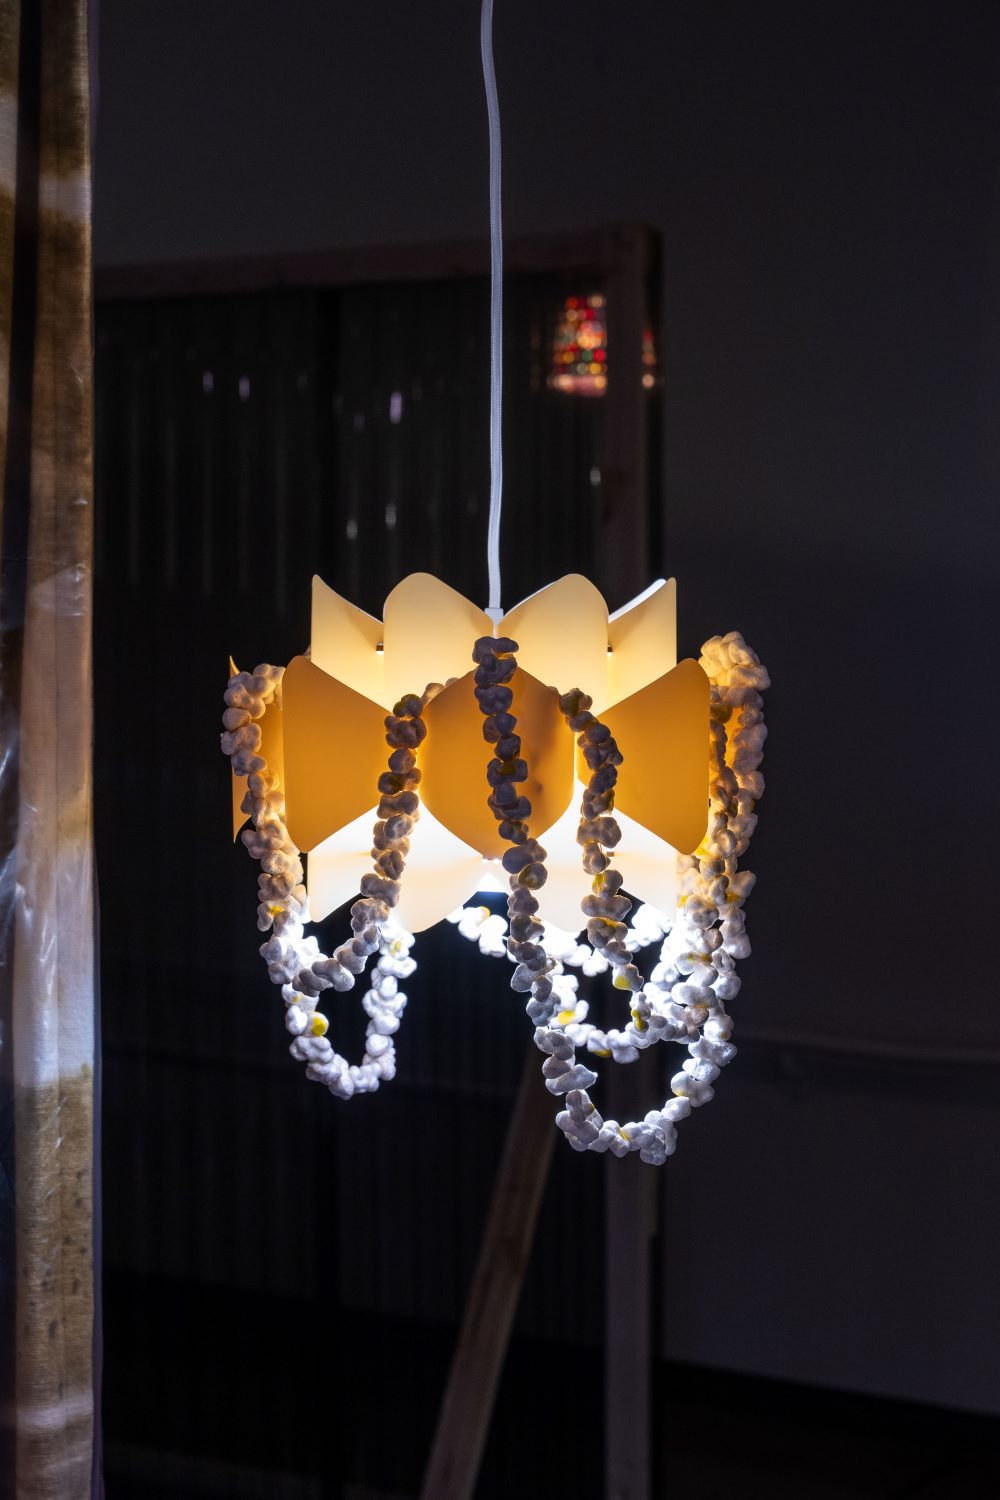 A ceiling lamp made of beige and yellow plastic glows in the dark, with what appears to be popcorn strings draped on it.